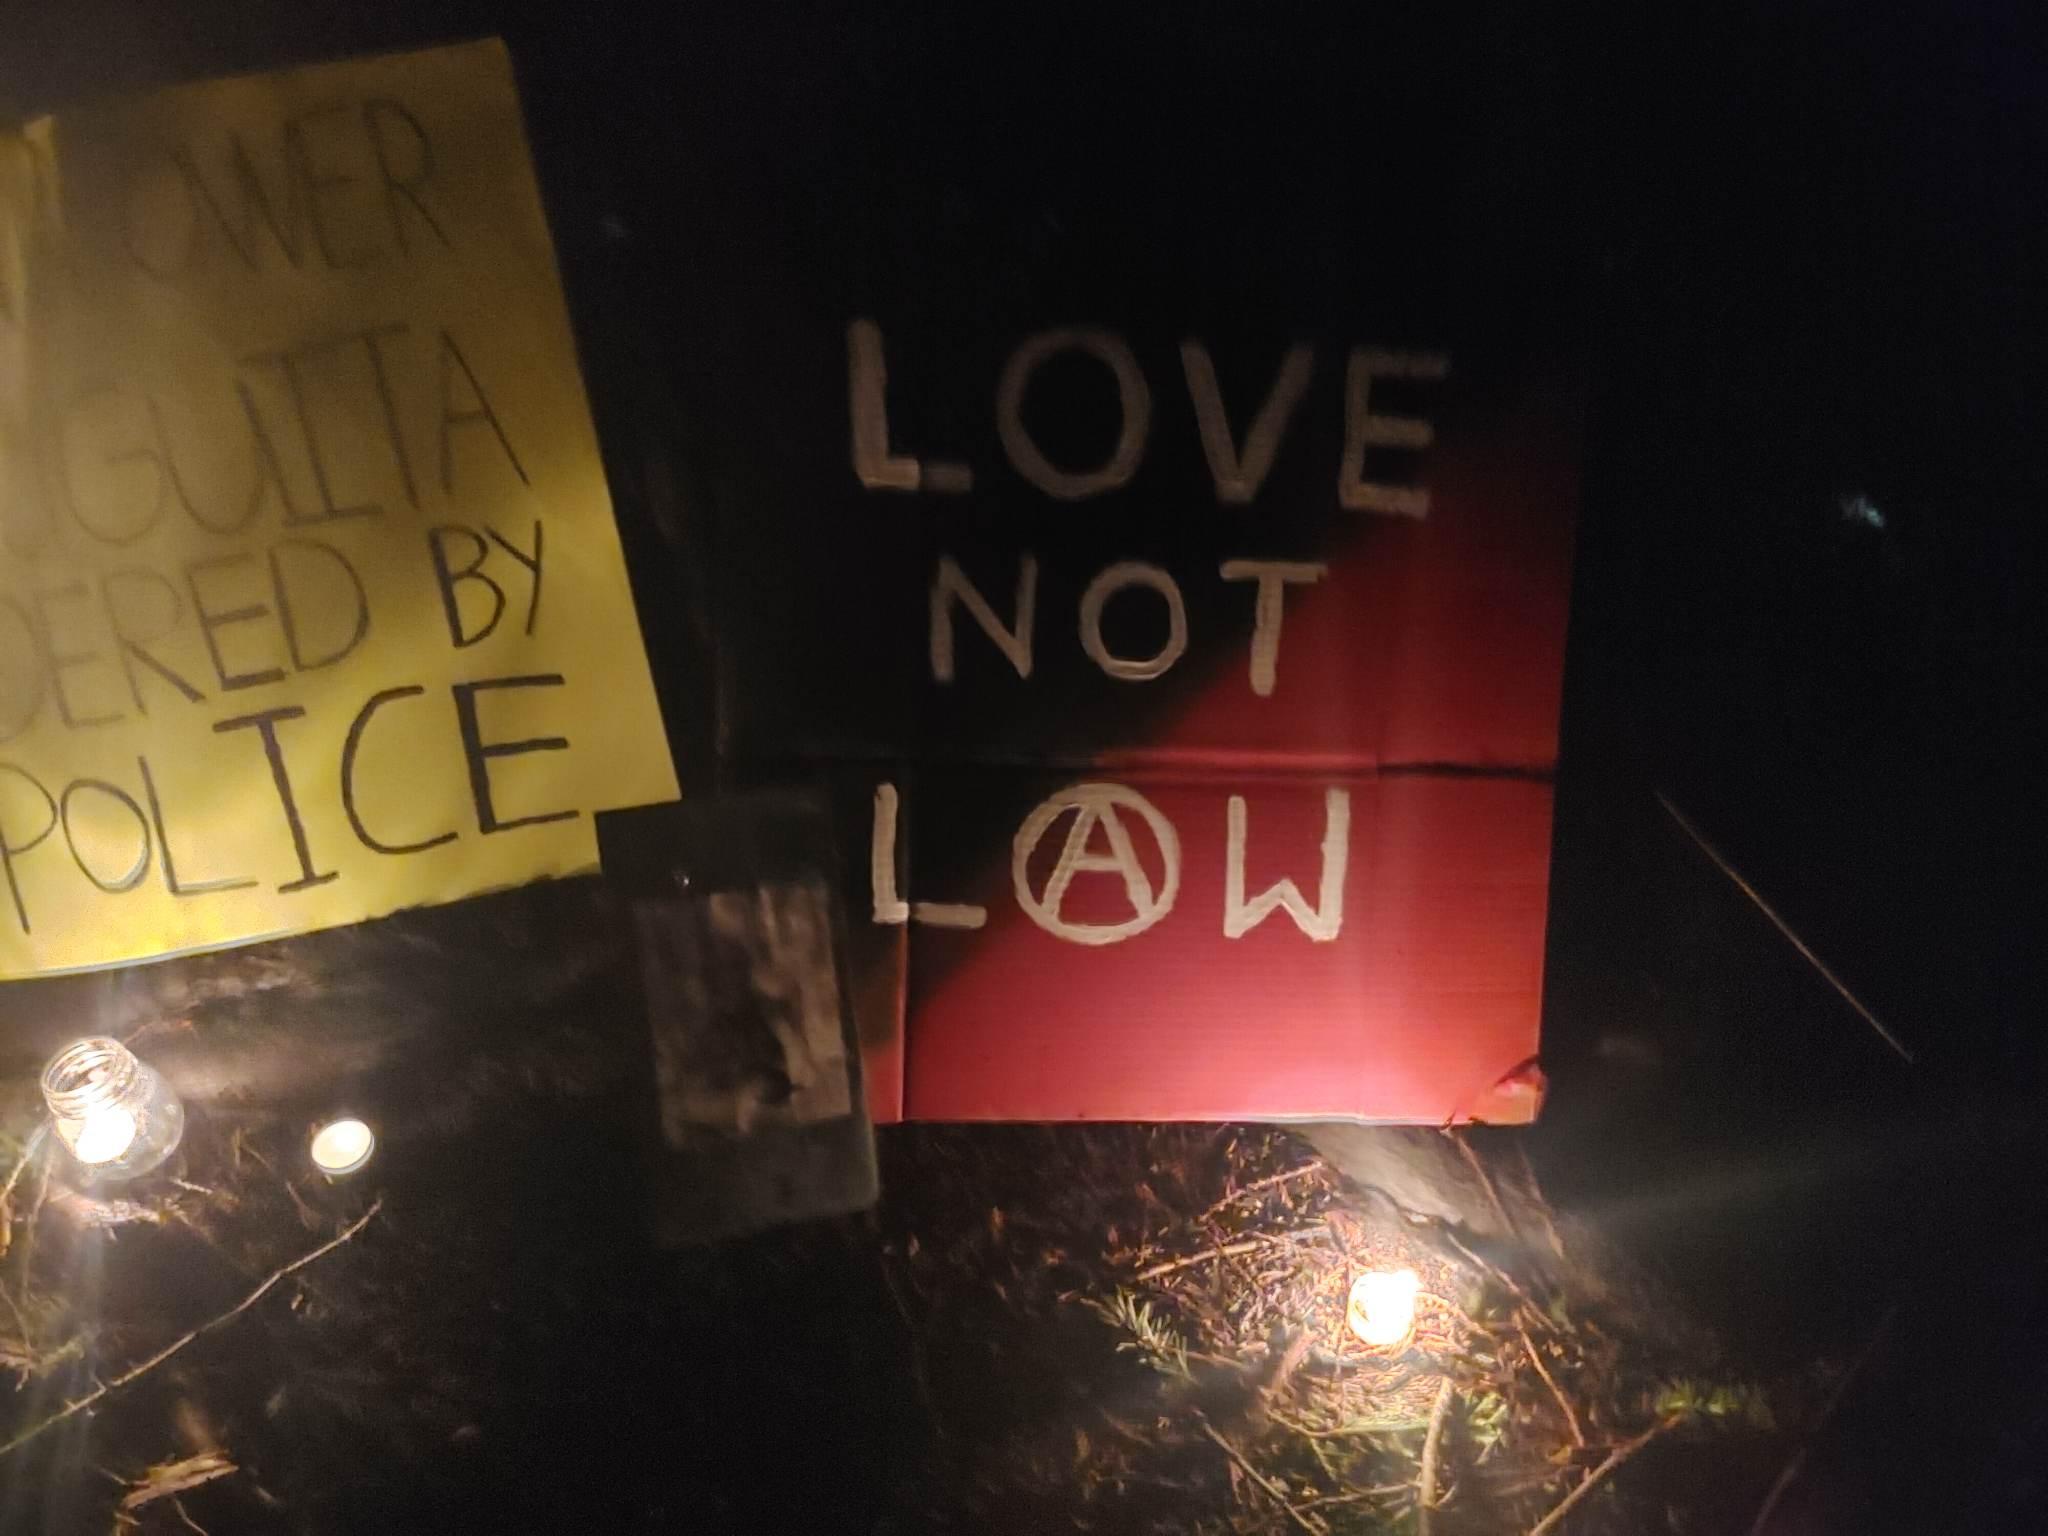 A sign with lit candles near it says "LOVE NOT LAW" in white font. The "A" in "Law" is an anarchist circle-A symbol. The background of the sign is a black and red anarcho-communist flag. 